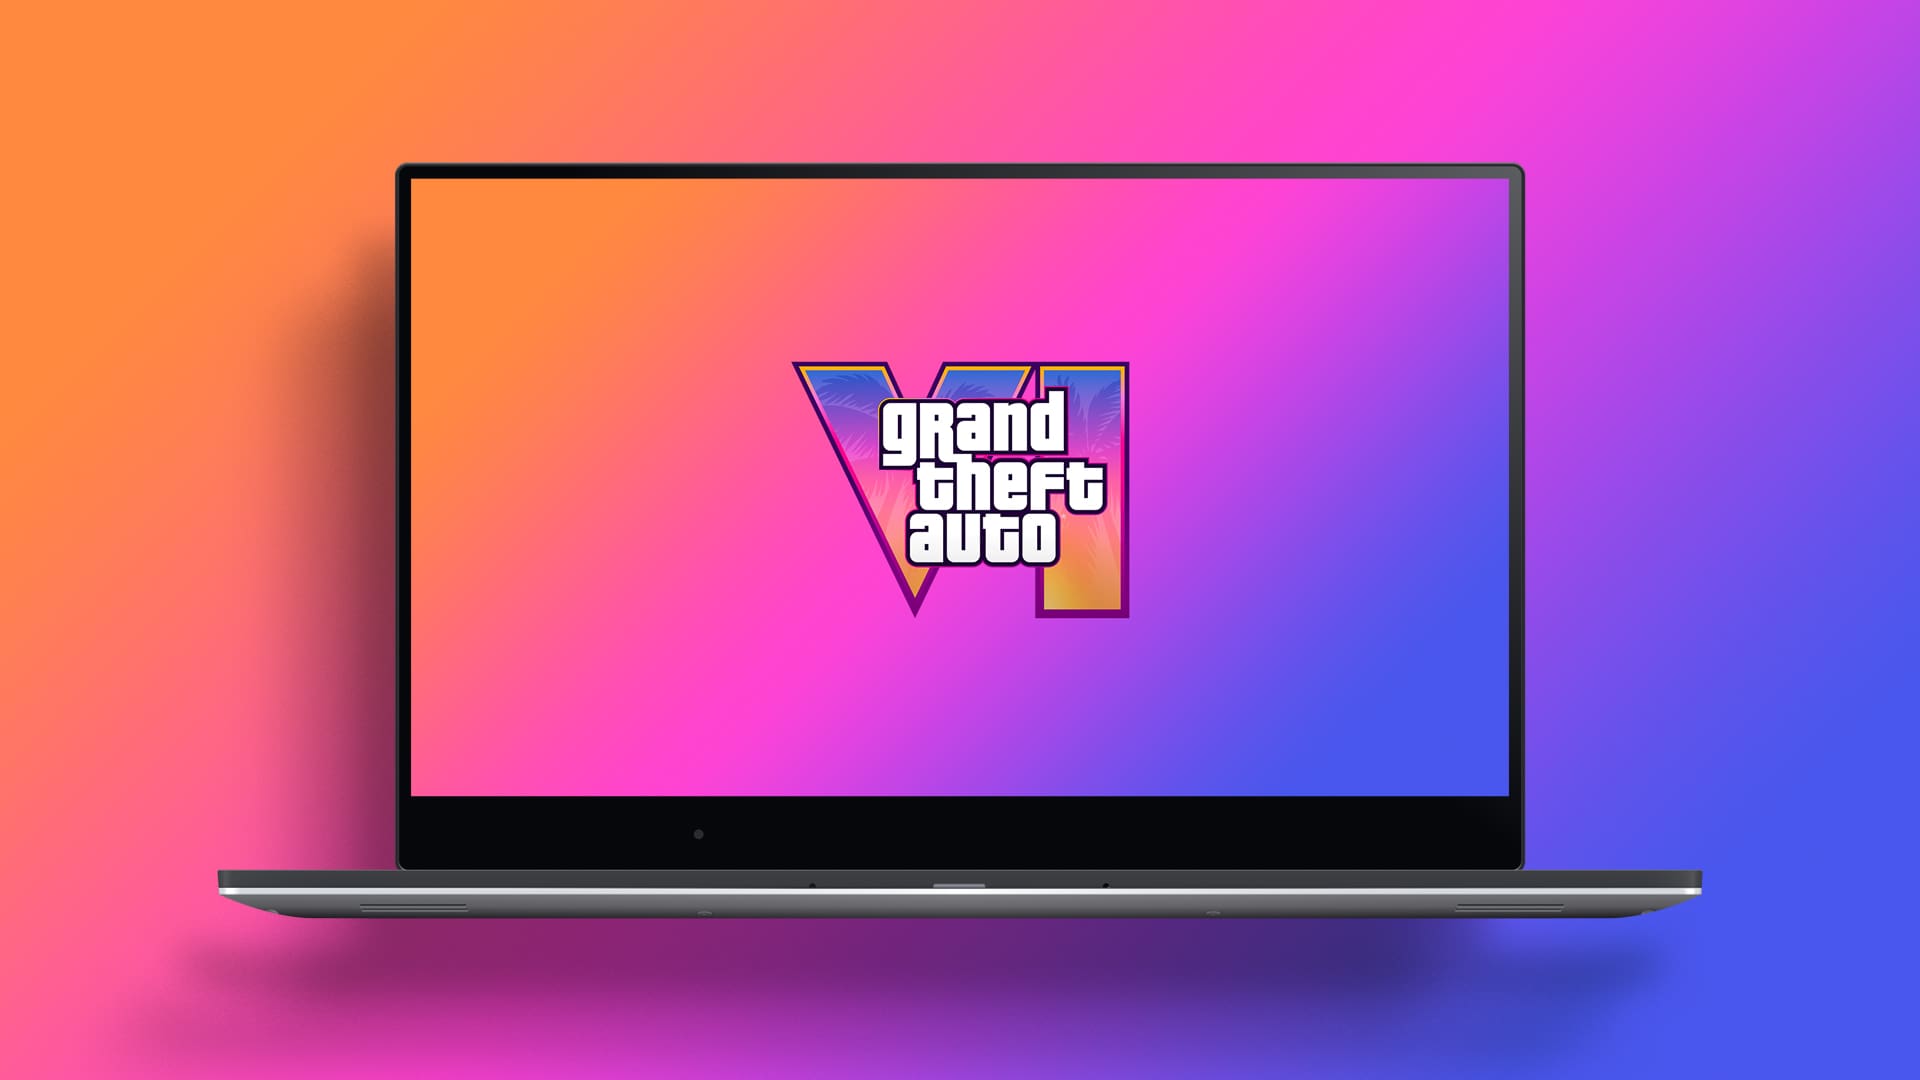 Elegant wallpaper with the Official Grand Theft Auto VI logo and text